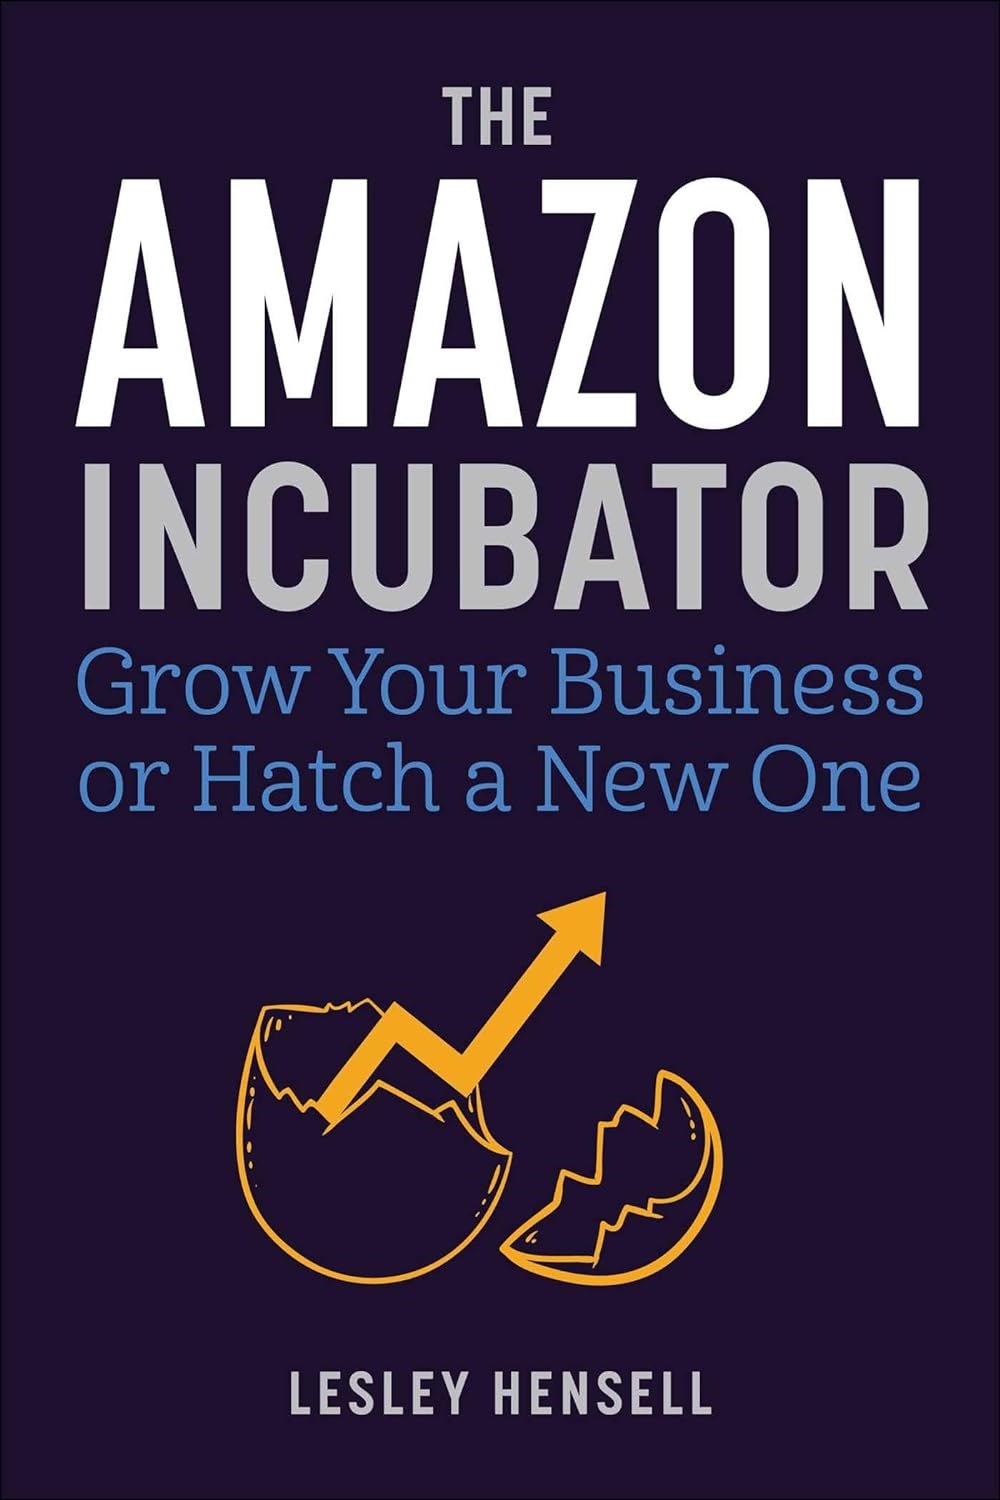 Amazon Incubator: Grow Your Business or Hatch a New One